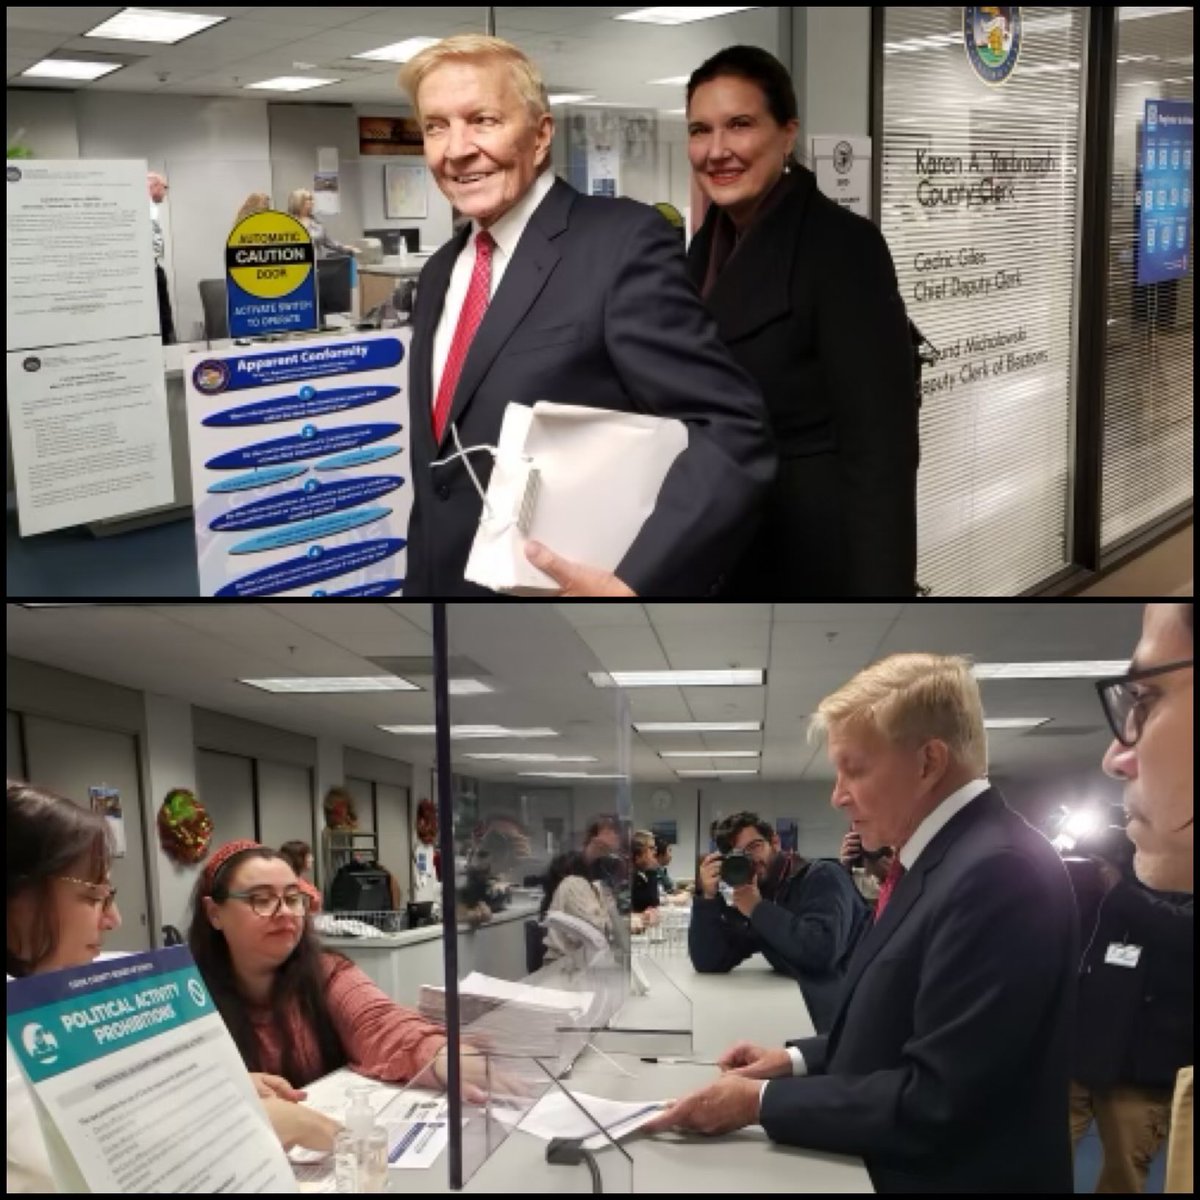 Today we filed four times the number of signatures necessary so I can reverse the catastrophic policies of Kim Foxx and her Democratic enablers.
#EnoughIsEnough 
#VoteFioretti for Cook County State’s Attorney. 
#SafeStreets #StrongCommunities